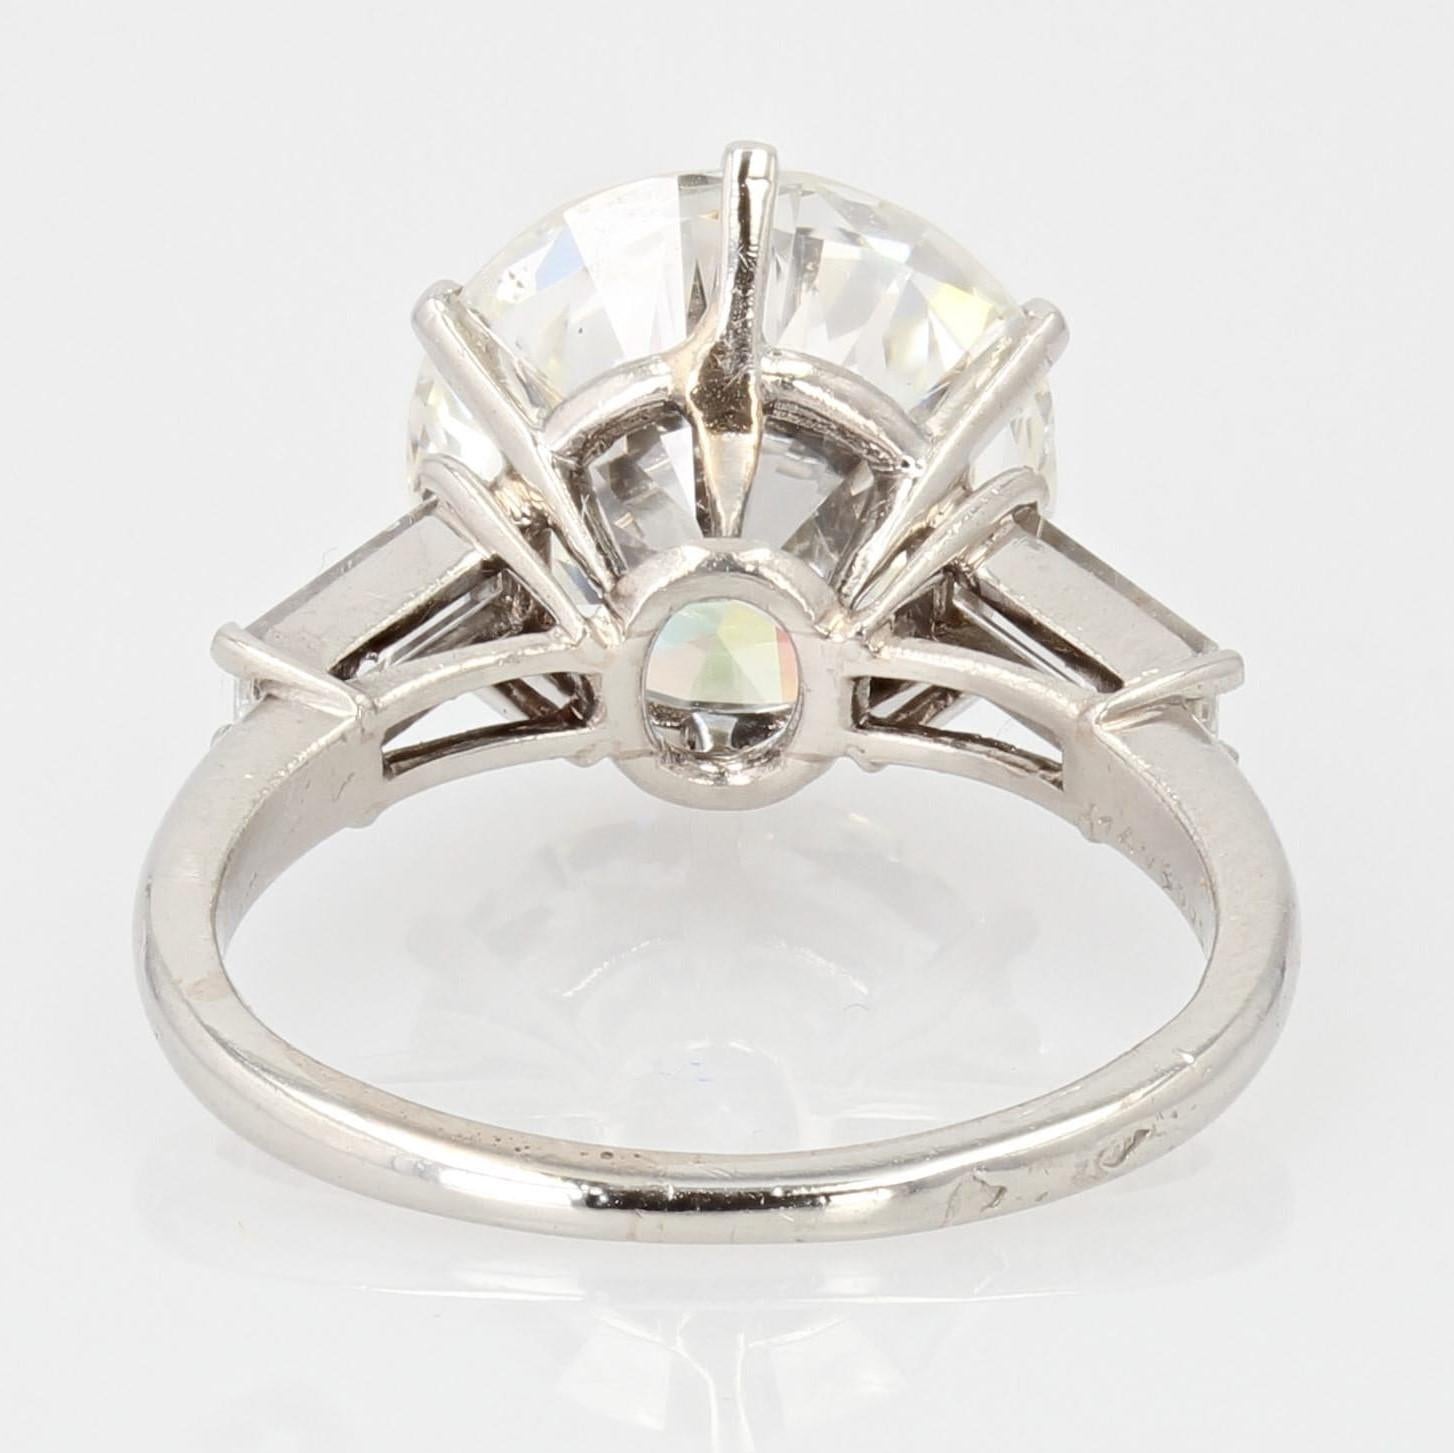 1970s French Mauboussin 4, 17 Carat Diamond Platinum Solitaire Ring For Sale 1